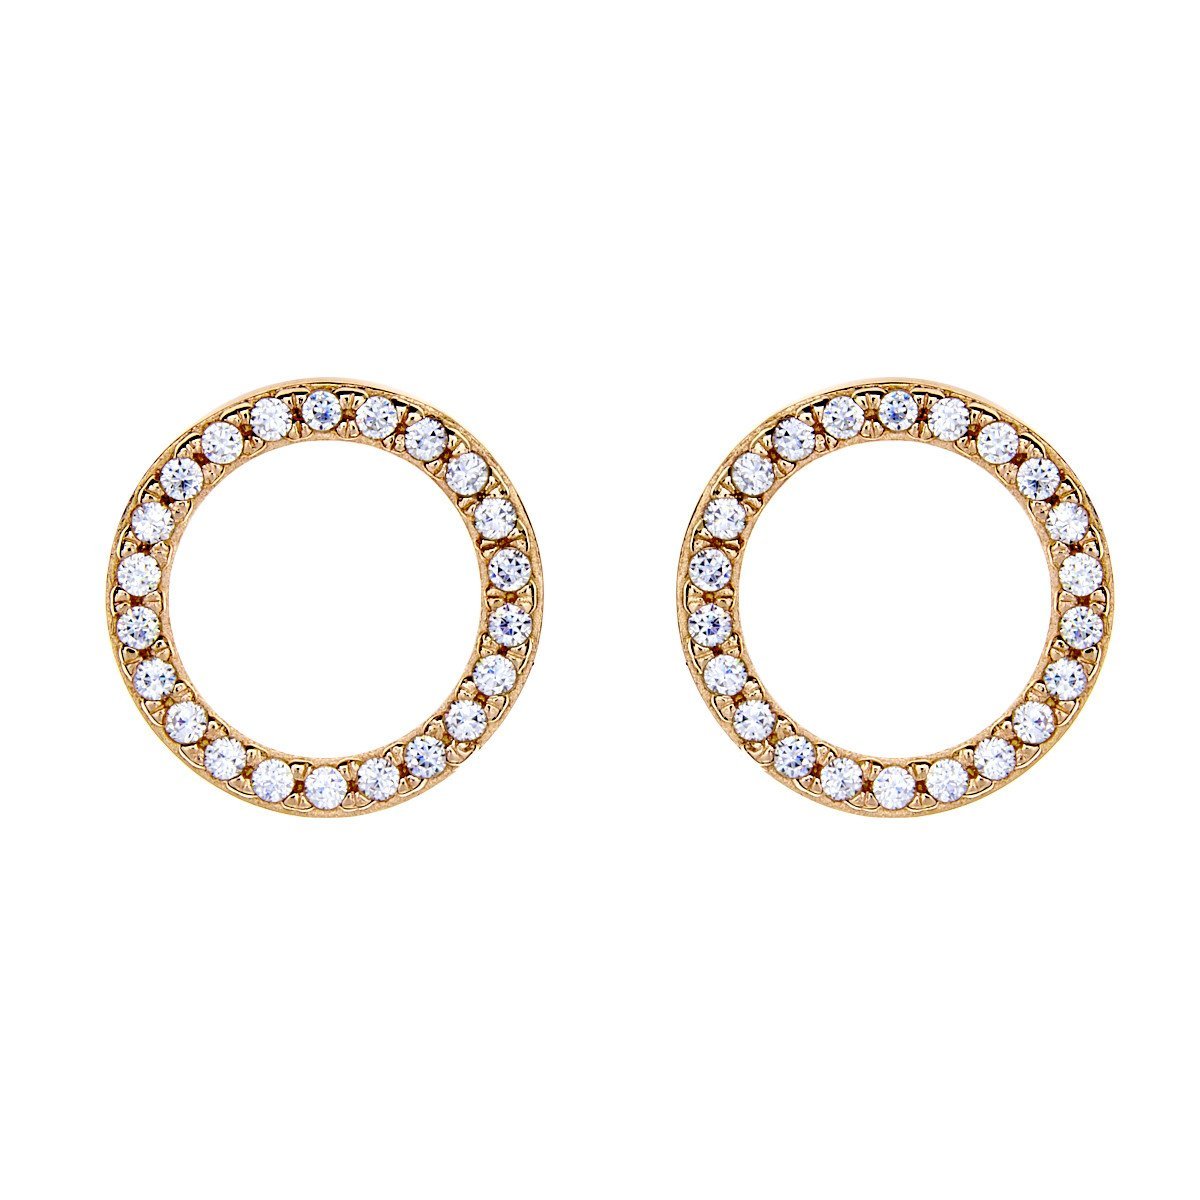 Sybella Earrings Sybella gold circle cubic stud